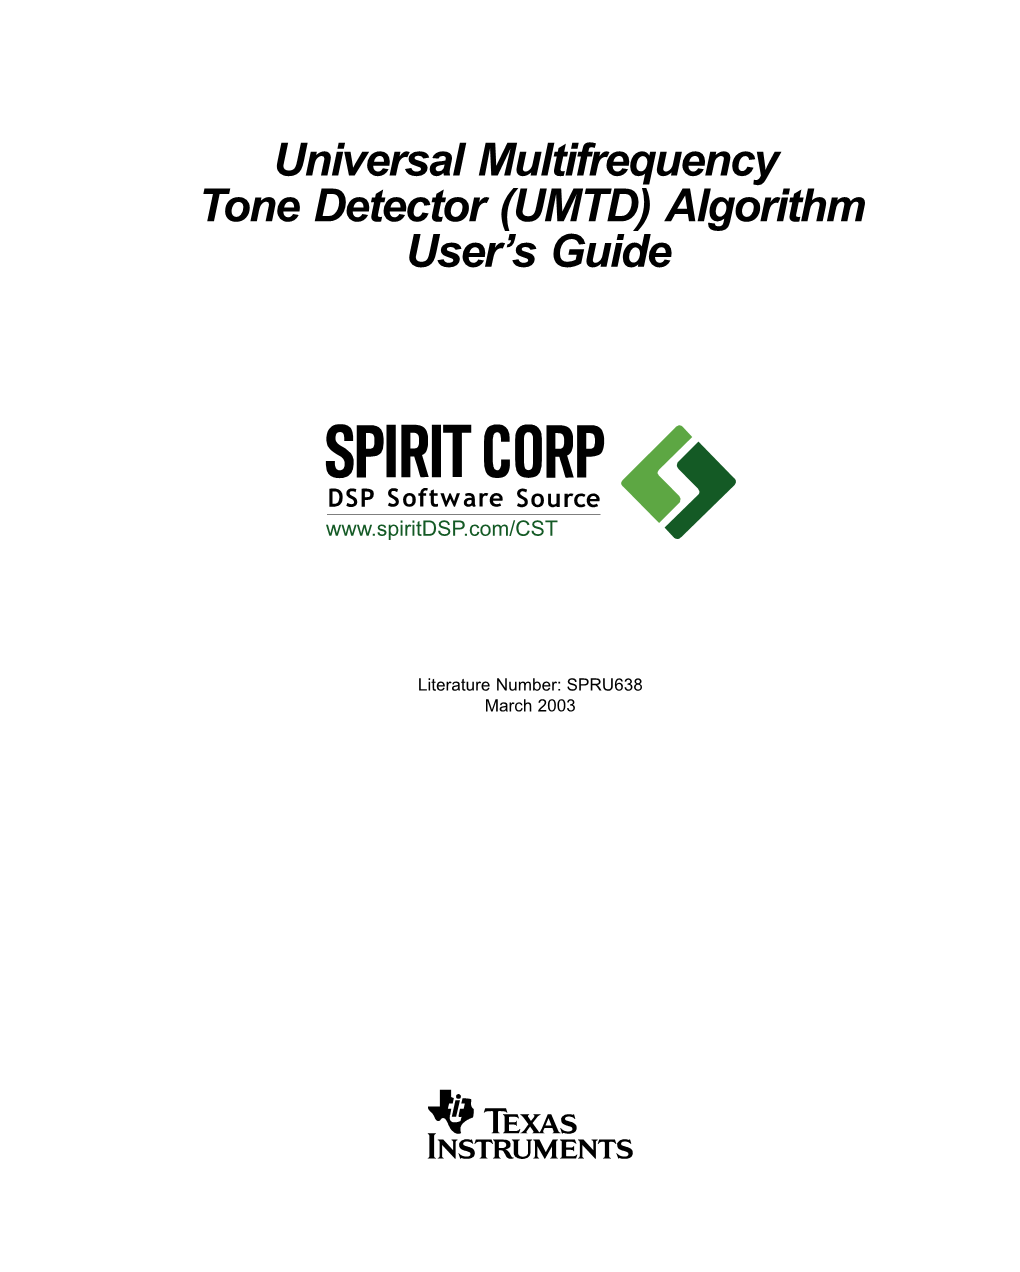 Universal Multifrequency Tone Detector (UMTD) Algorithm User’S Guide